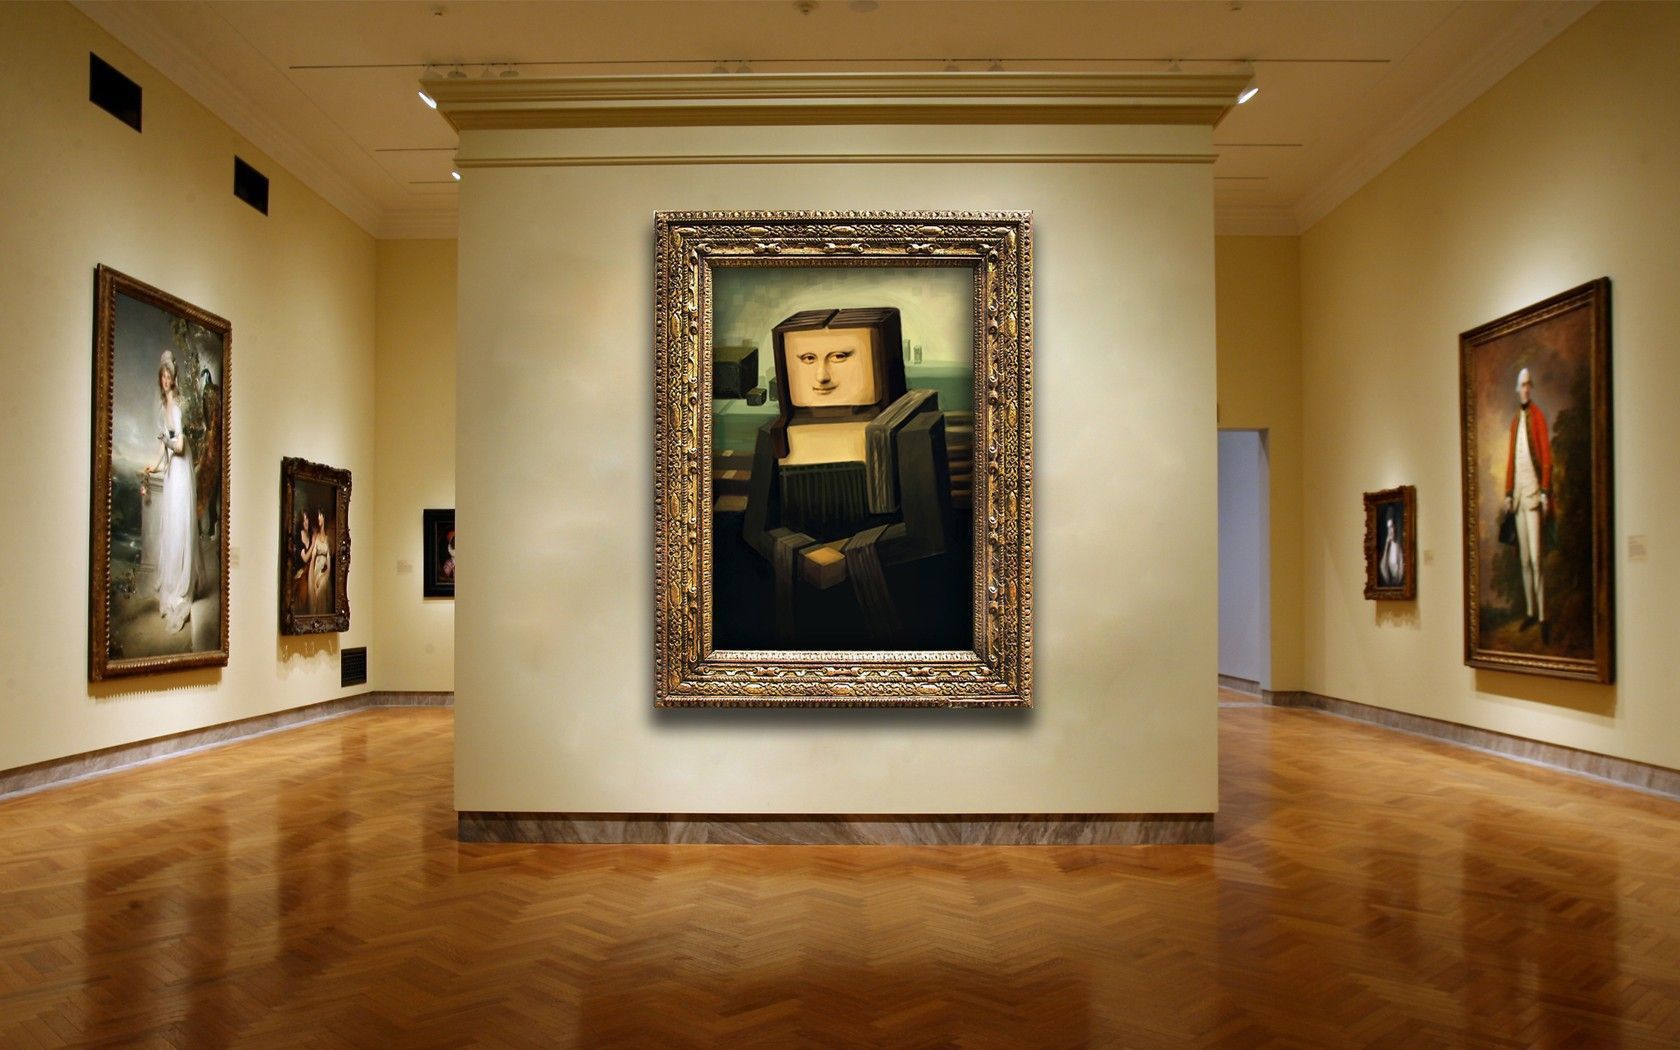 Mona Lisa in the style of Minecraft wallpapers and images ...